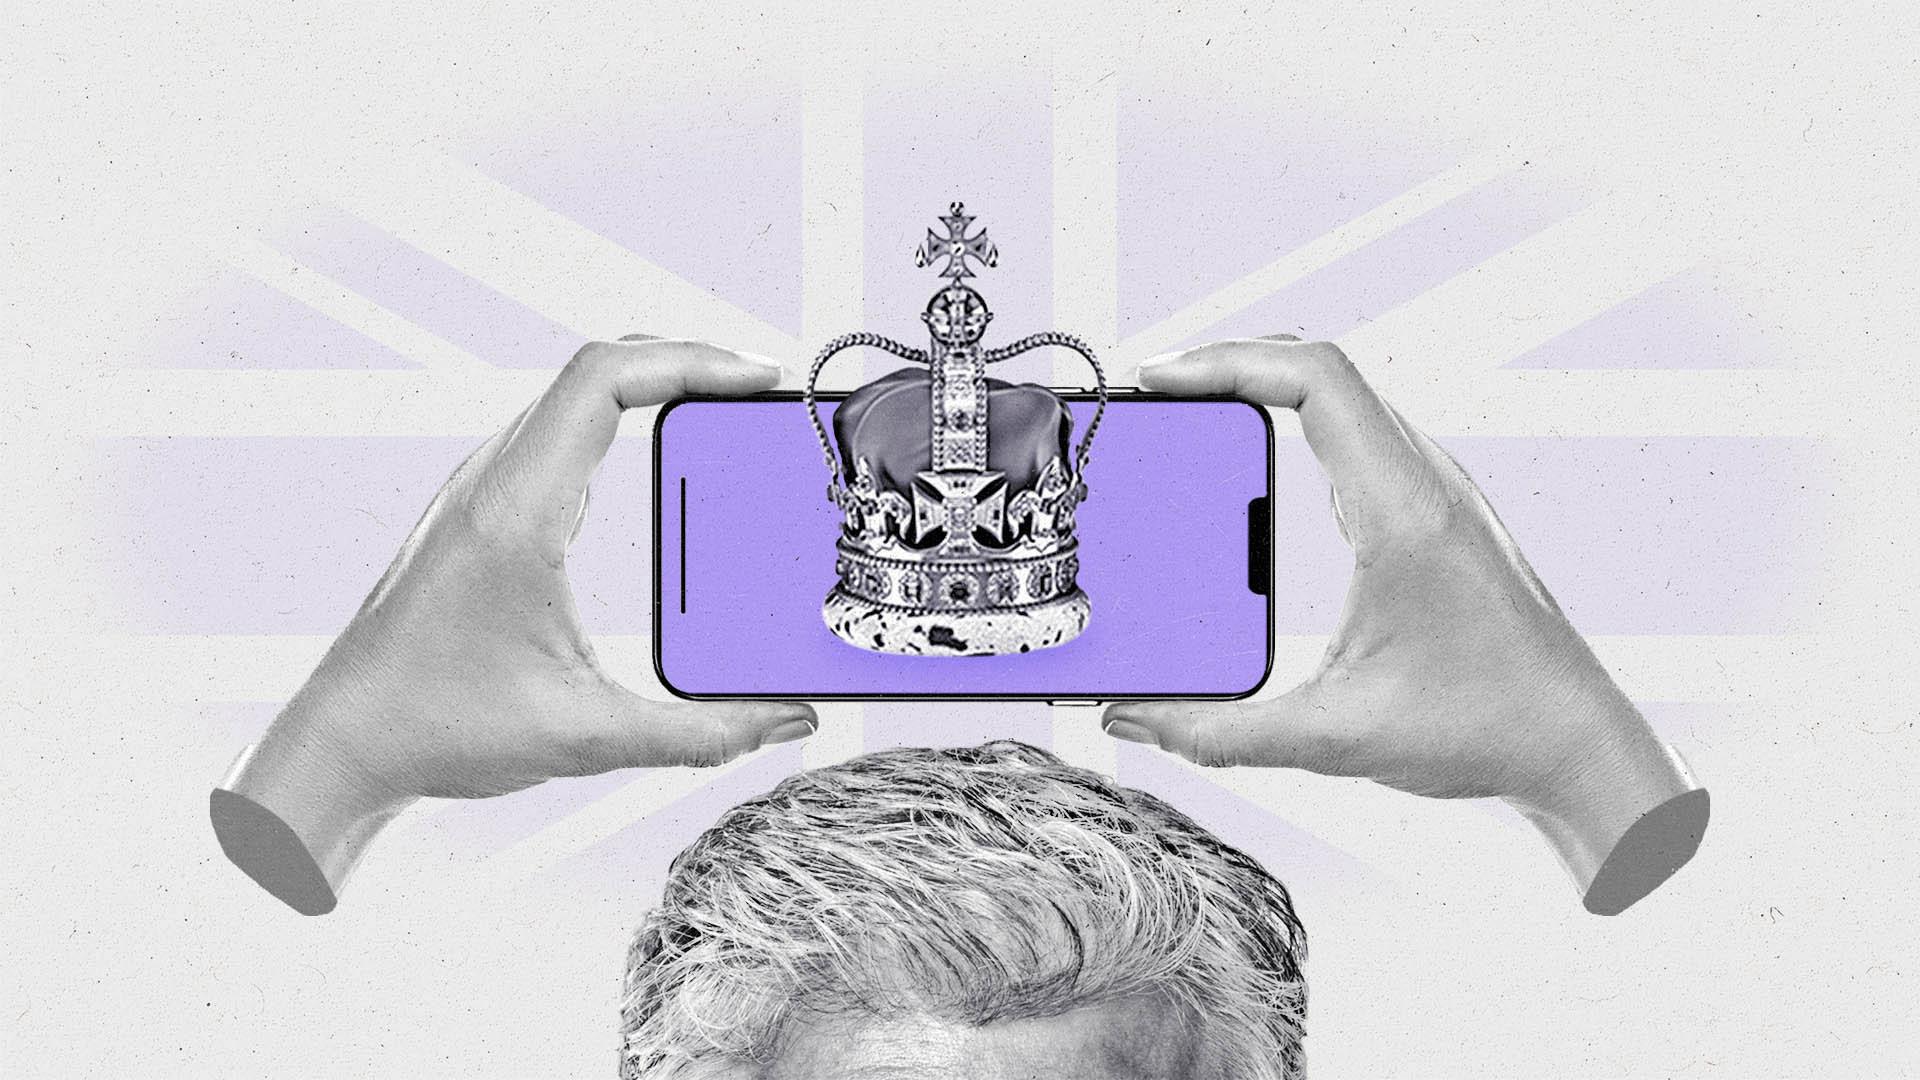 A crown in a smartphone is held above the scalp of a man's head by two hands.